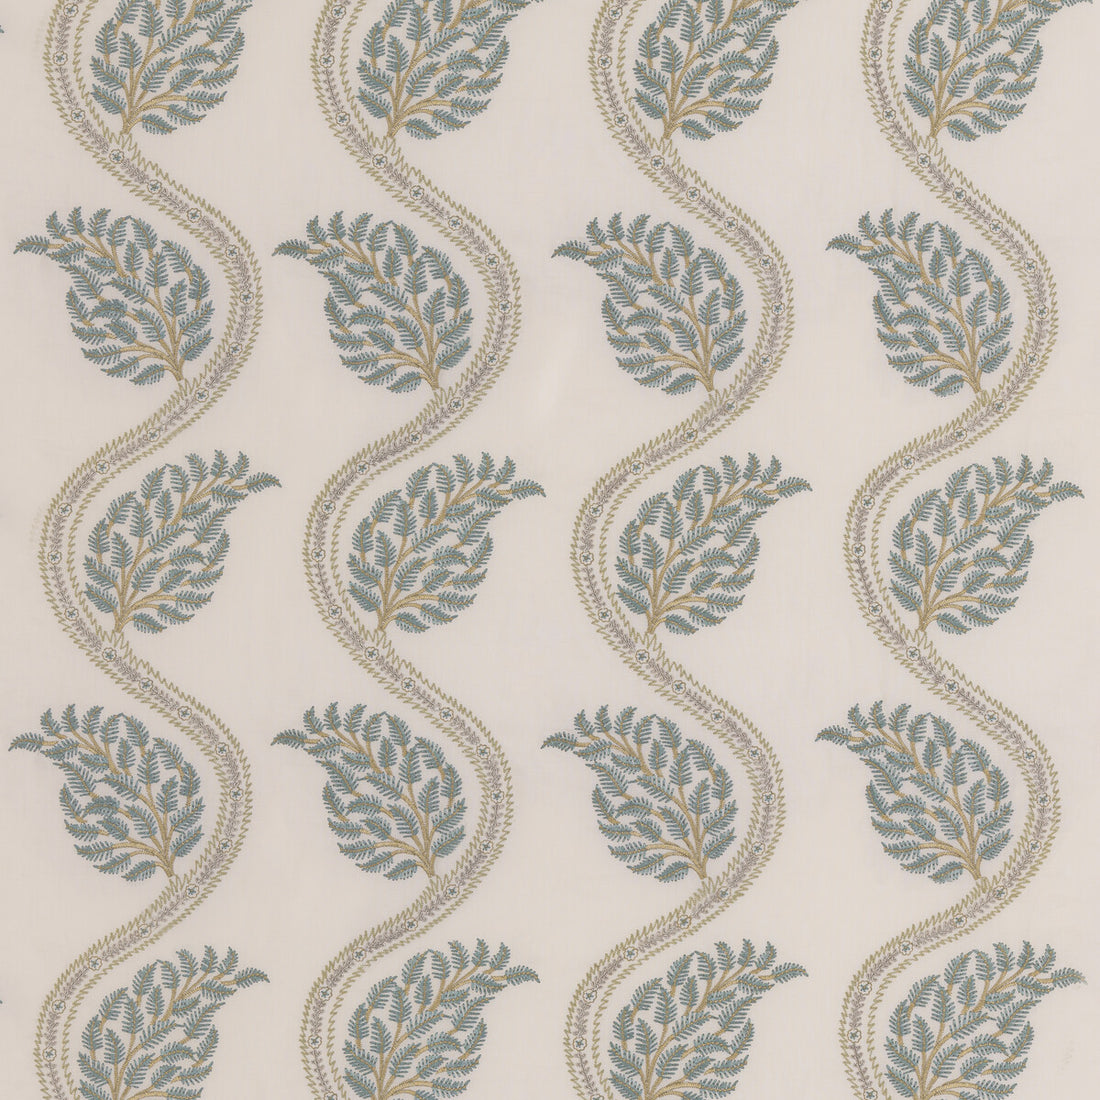 Filkins fabric in sage/aqua color - pattern BF11031.2.0 - by G P &amp; J Baker in the Burford collection